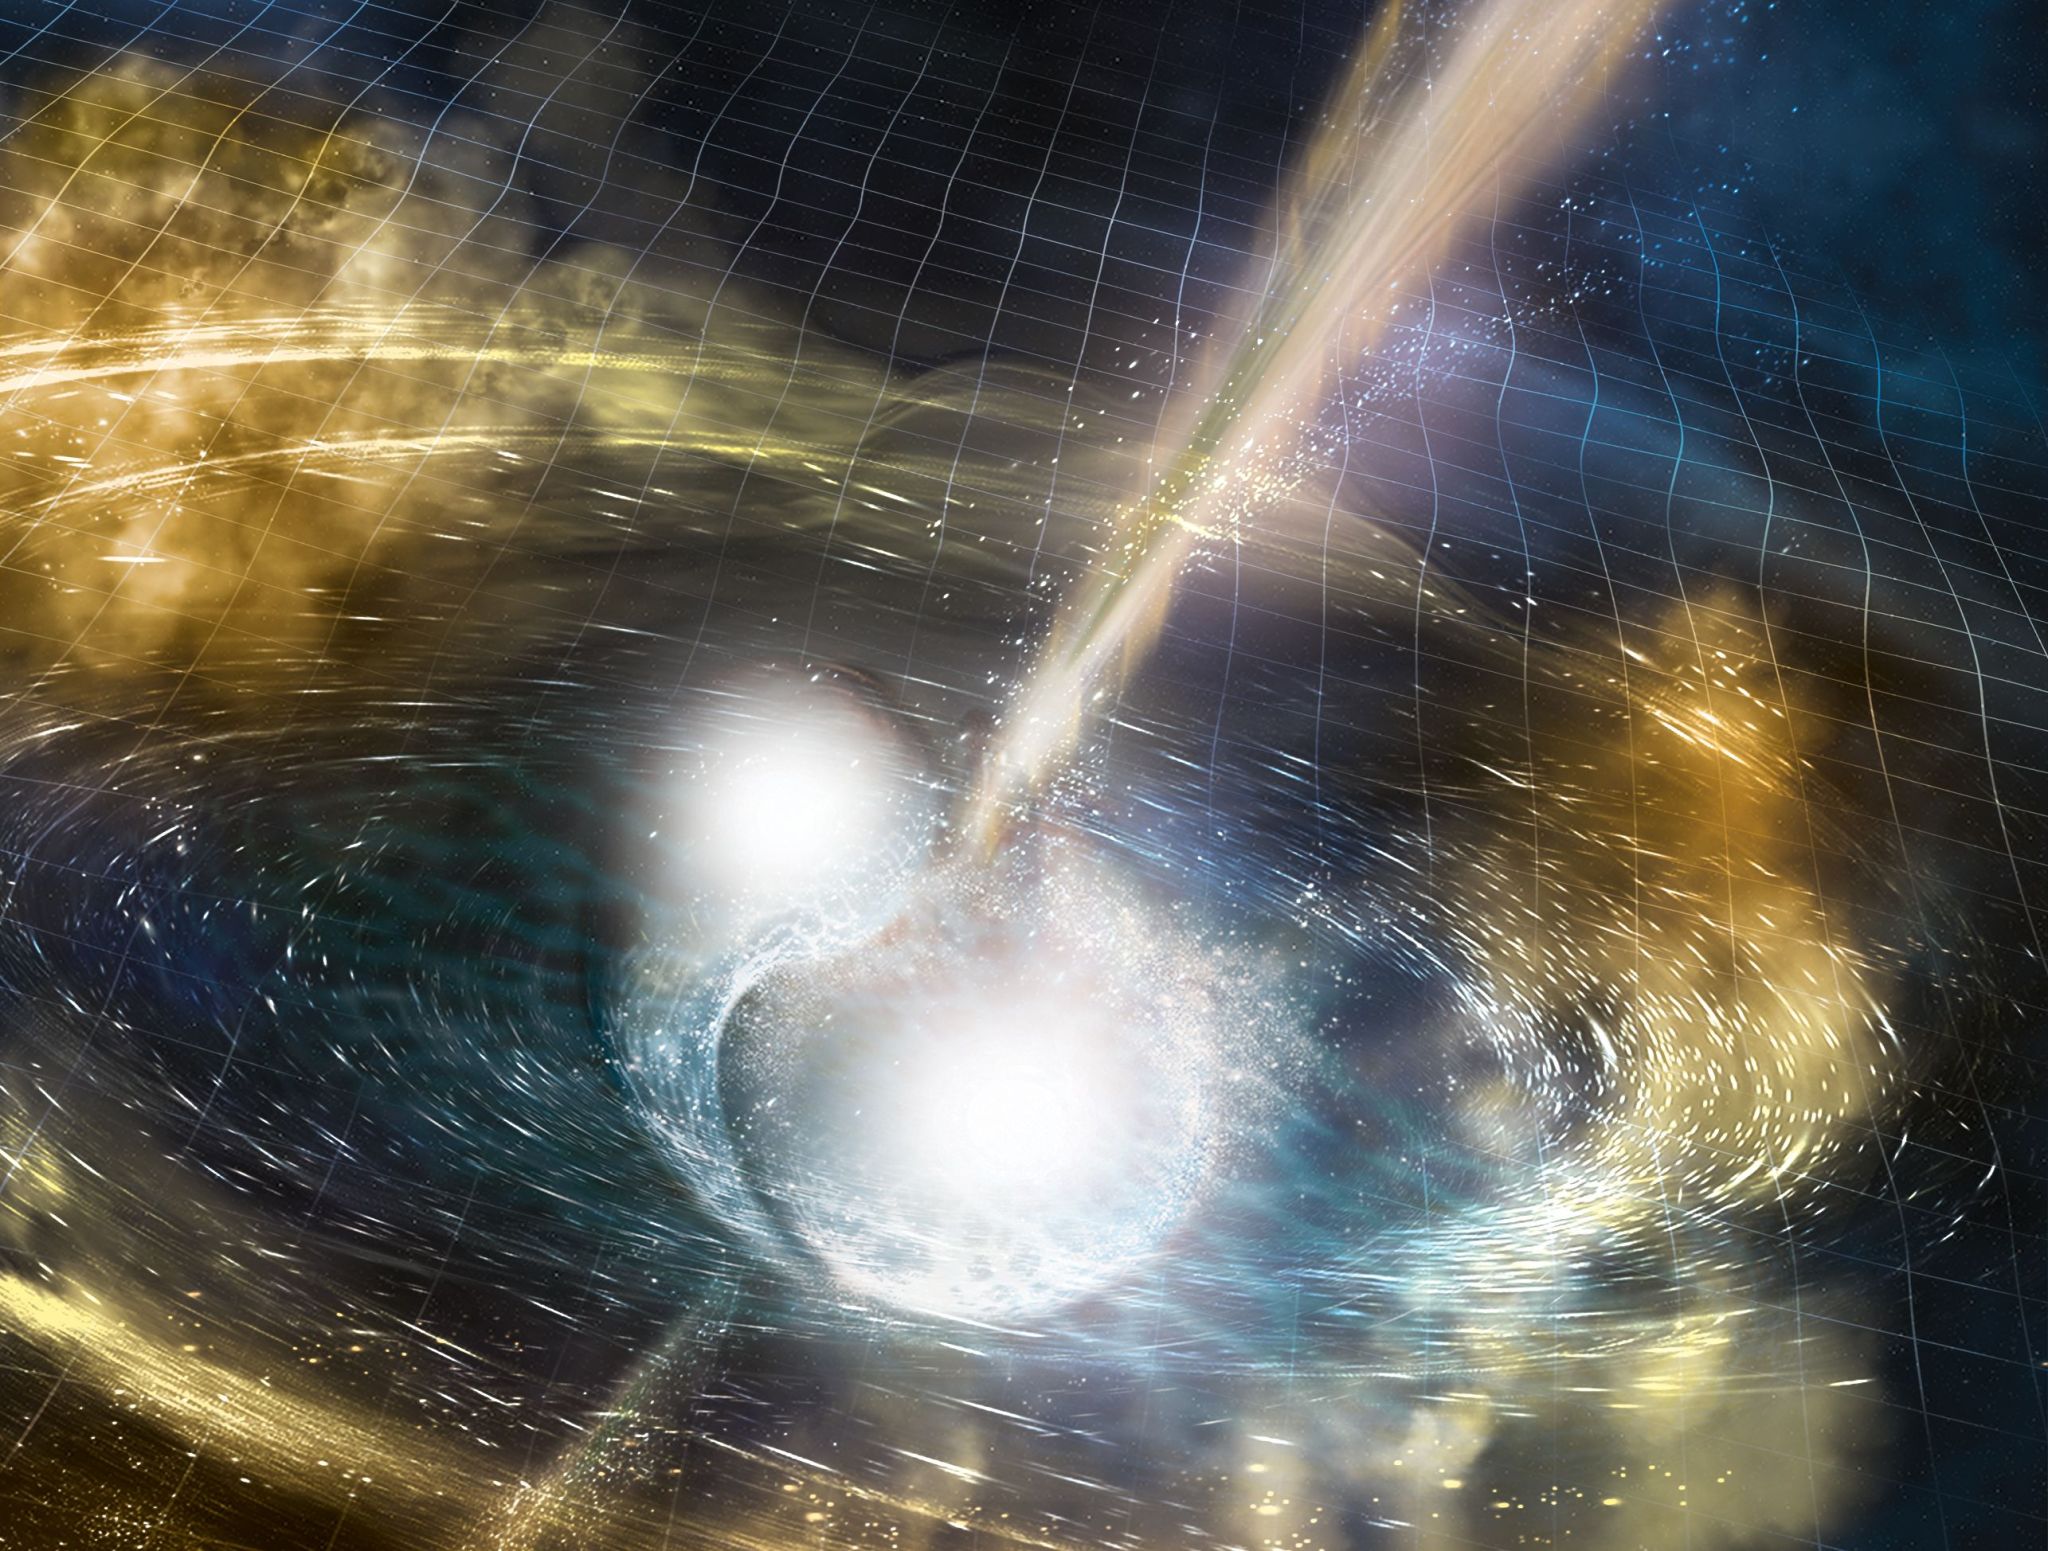 At the center of this illustration is a bright region of light that looks like two balls that haven't quite merged into one. Two rays of white and orange light emanate from that central collision, one up and to the right, the other down and to the left, though you can't see the one to the left quite as well because there is also a disk of swirling material blocking the view. There is also a faint grid across the entire image, representing space-time. Ripples in the grid can be seen at the edges of the image, showing gravitational waves that had been emitted by the merger.